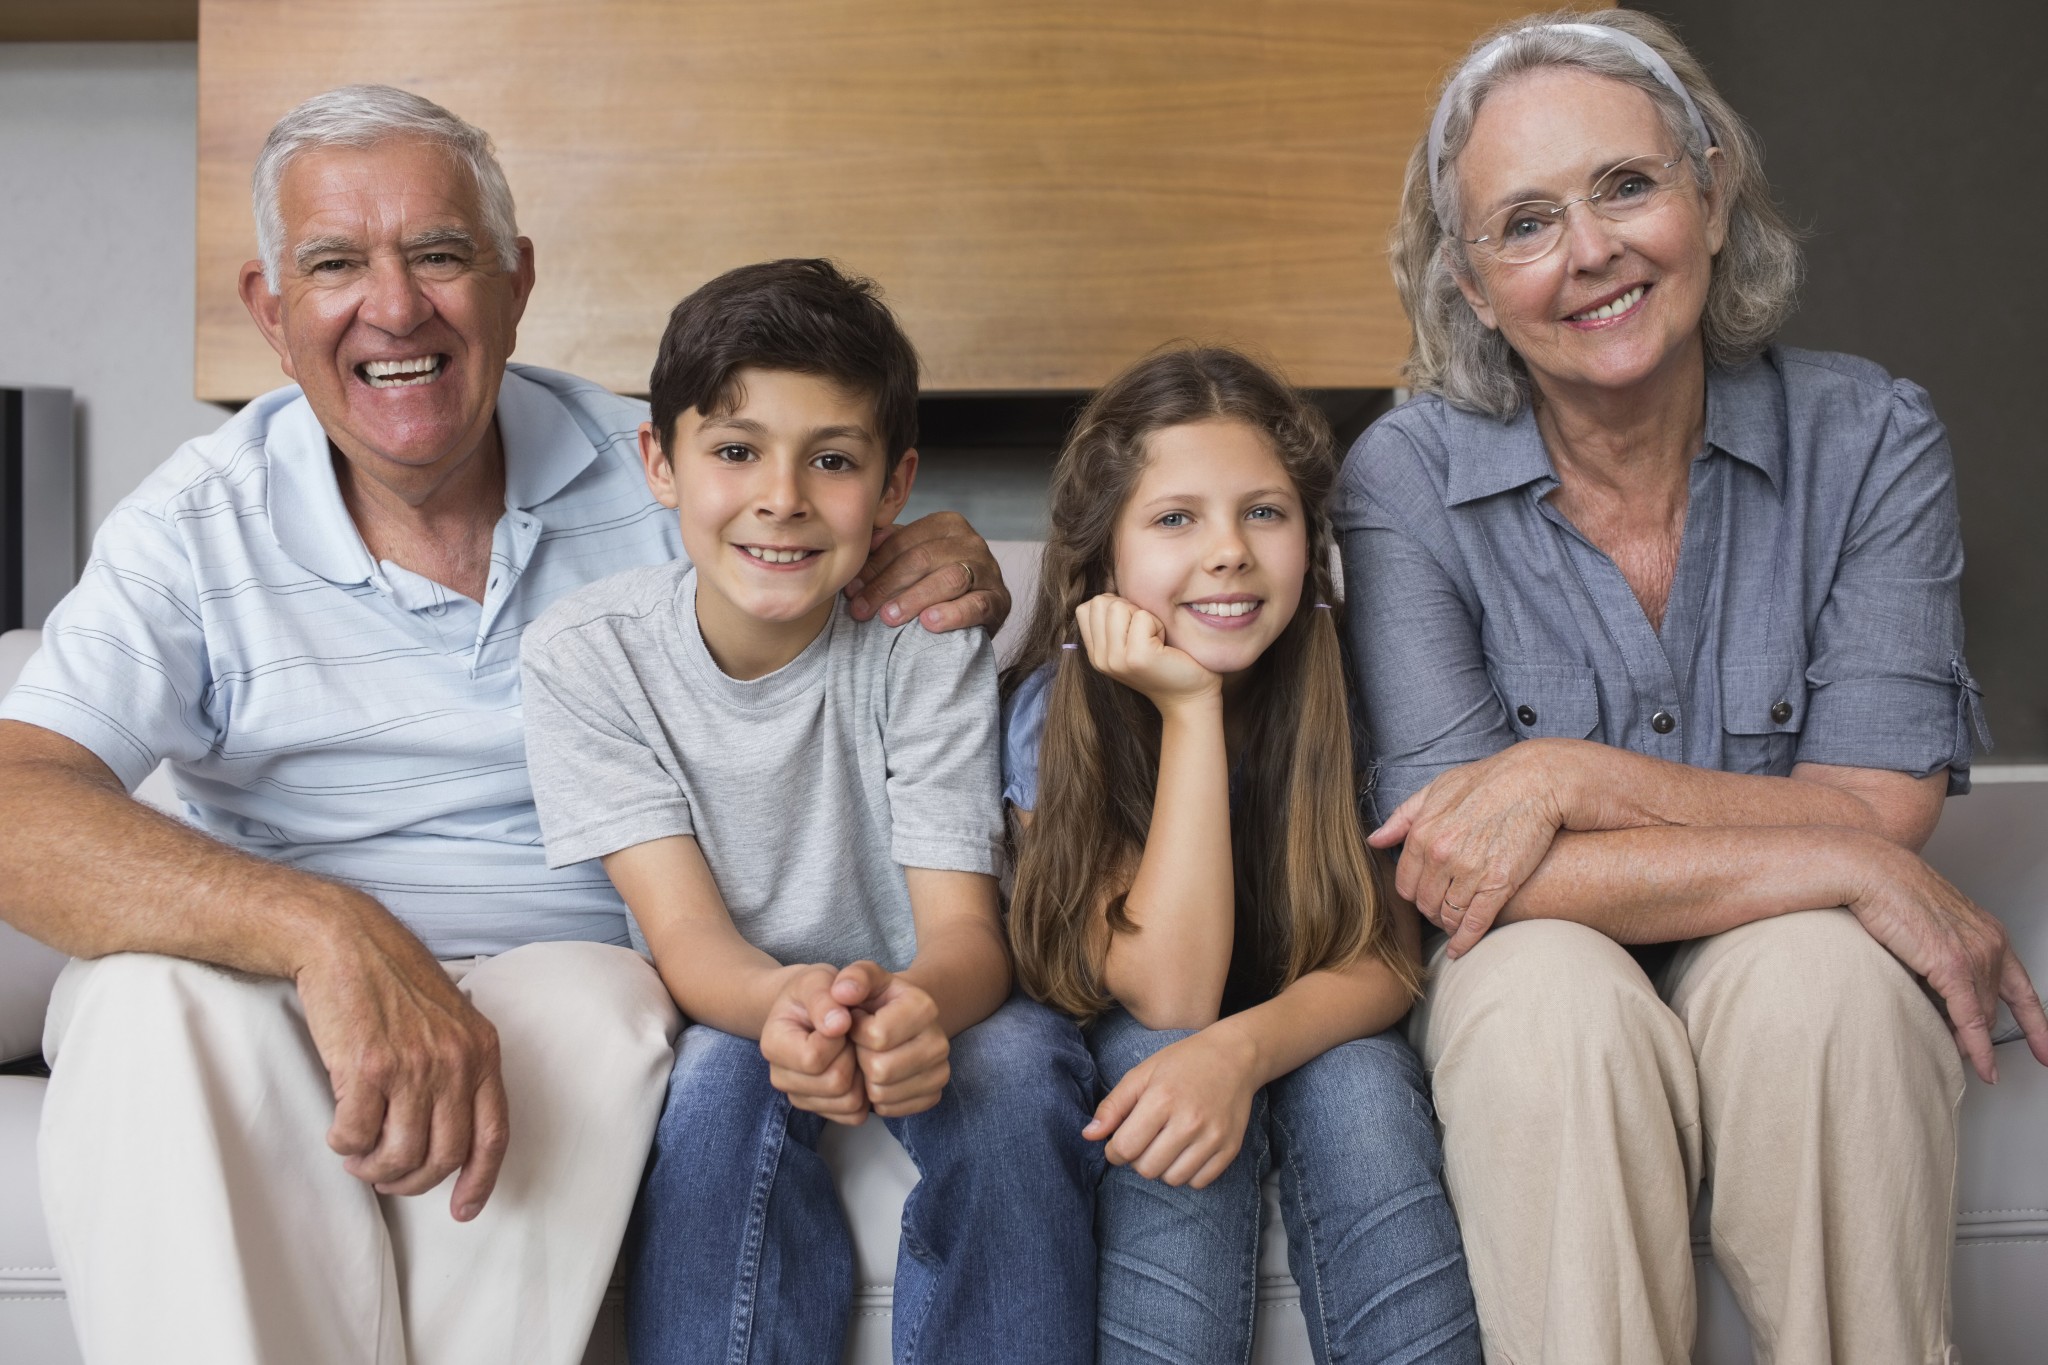 Grandpa is in the bedroom. Grandparents in the Living Room. Family and grandparents photo for Kids. Stock photo of grandparents sitting. Grandparents in the livingroom.